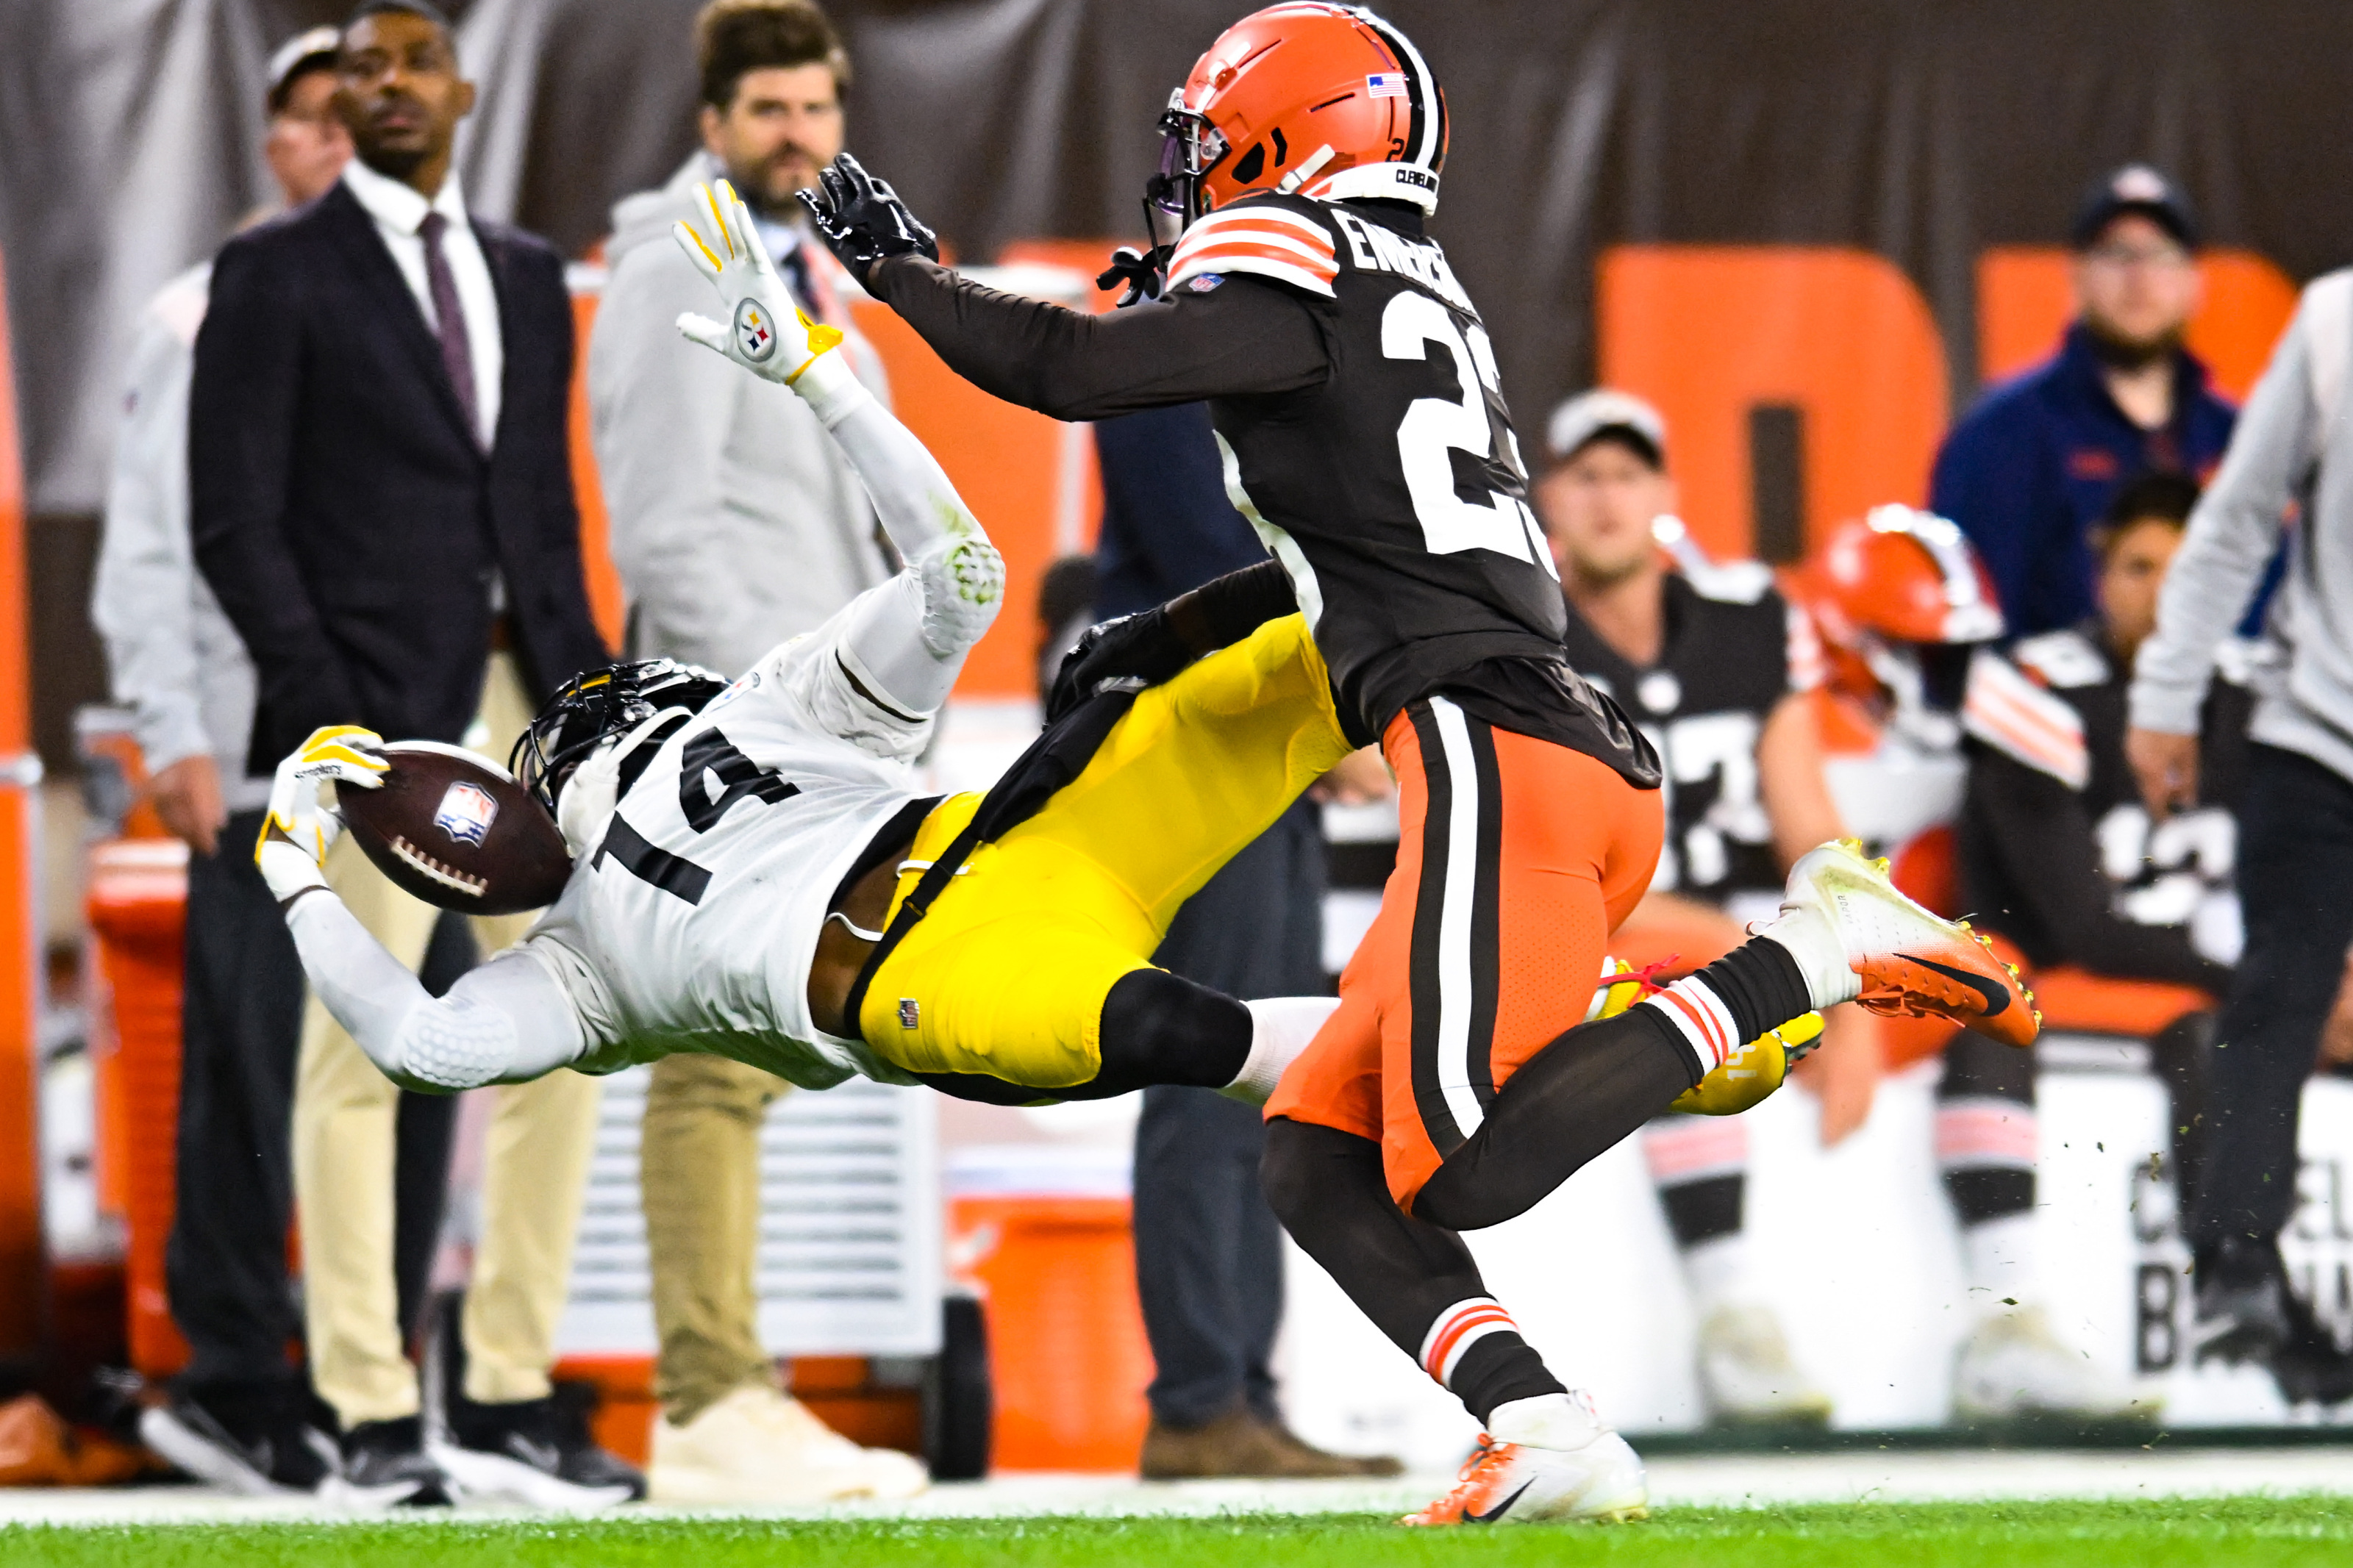 George Pickens catch just a glimpse of his ceiling with the Steelers